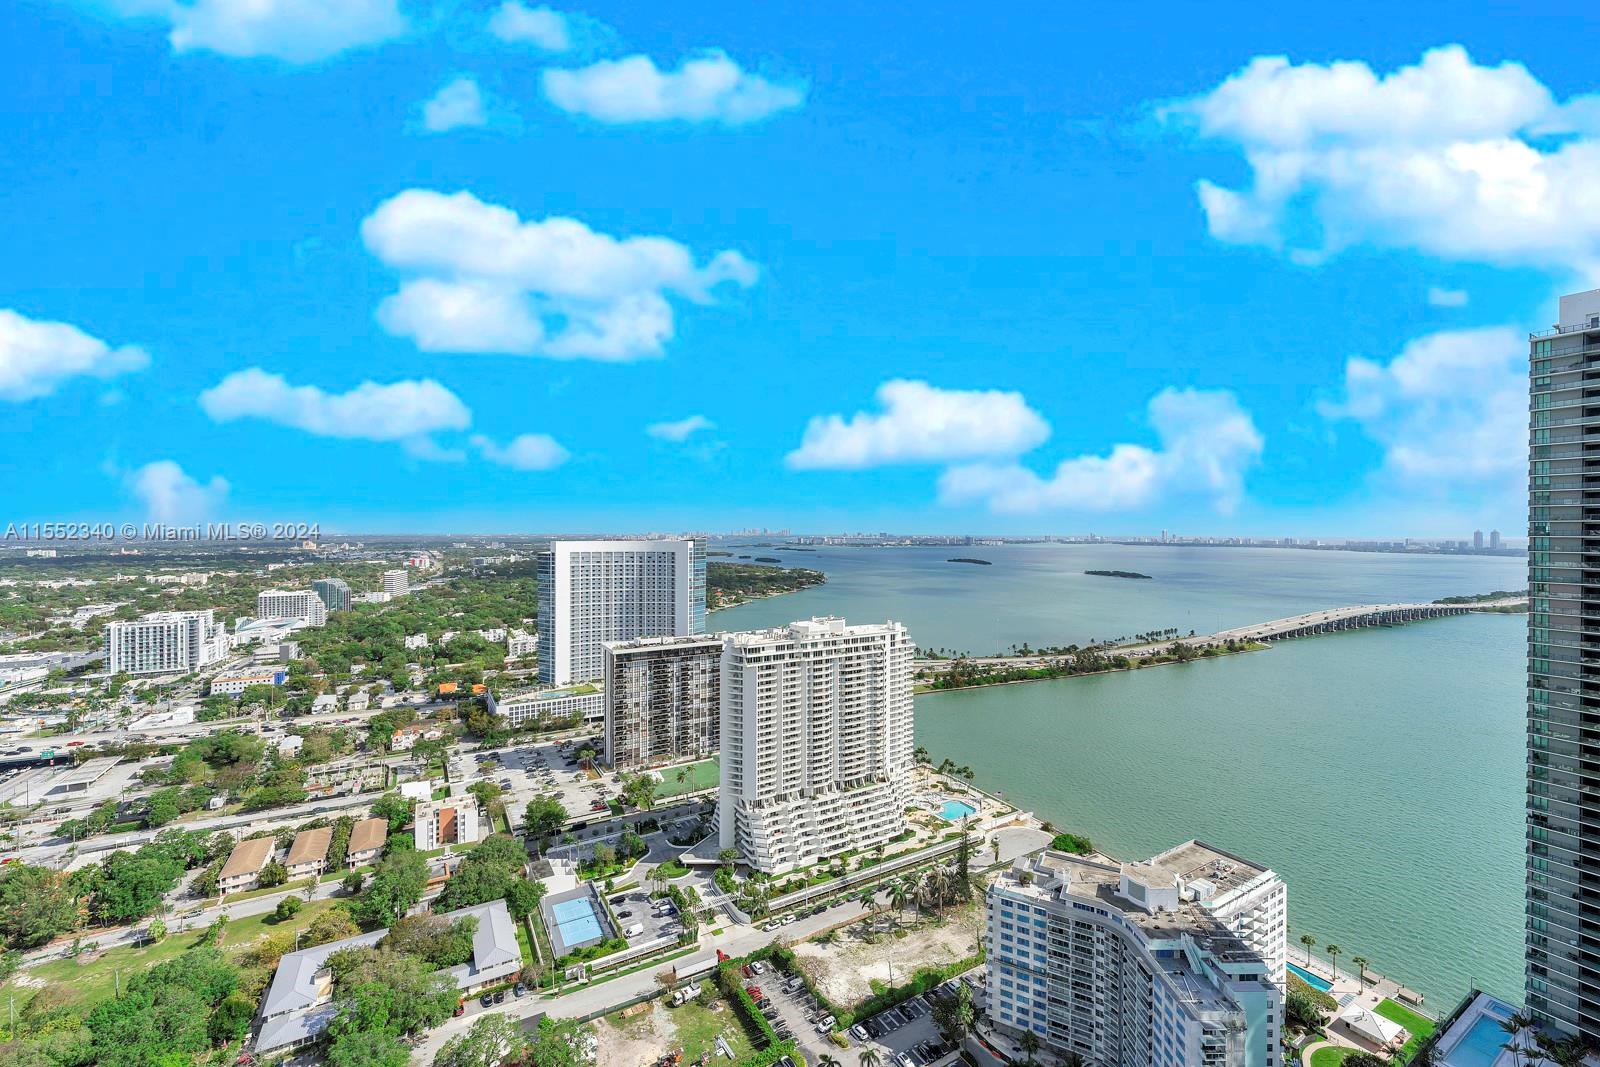 BEAUTIFUL VIEW TO THE BAY AND EXCELLENT FLOOR PLAN FOR THE PENTHOUSE LEVEL APARTMENT IN LUXURY TOWER PARAISO BAYVIEW. ENJOY AMAZING AMENITIES AND BEST CENTRAL LOCATION IN EDGEWATER/MIDTOWN AREA. EXTREMELY GOOD RENTAL UNIT. ROOF TOP POOL IS A GREAT SPOT TO BE IN OUR ETERNAL MIAMI SUMMER.